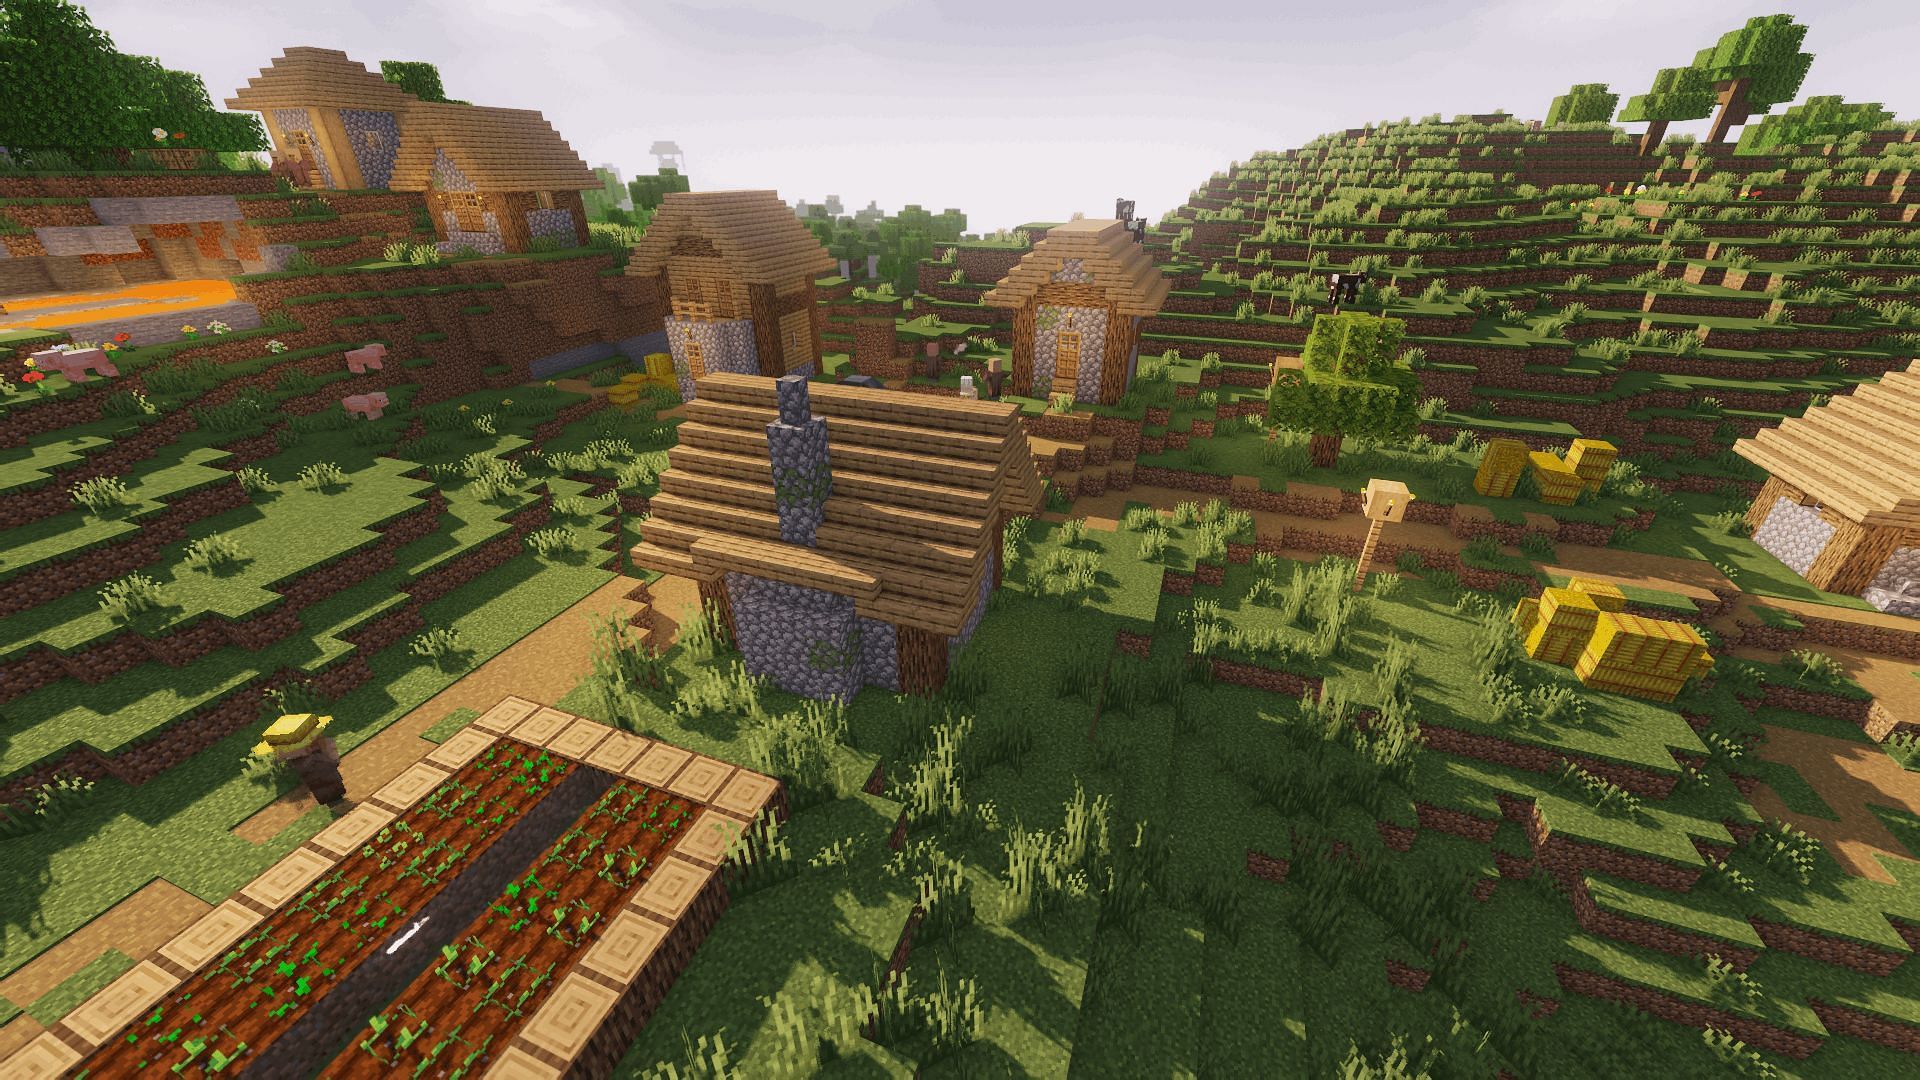 The game using Iris and Sodium to run a shader (Image via Minecraft)